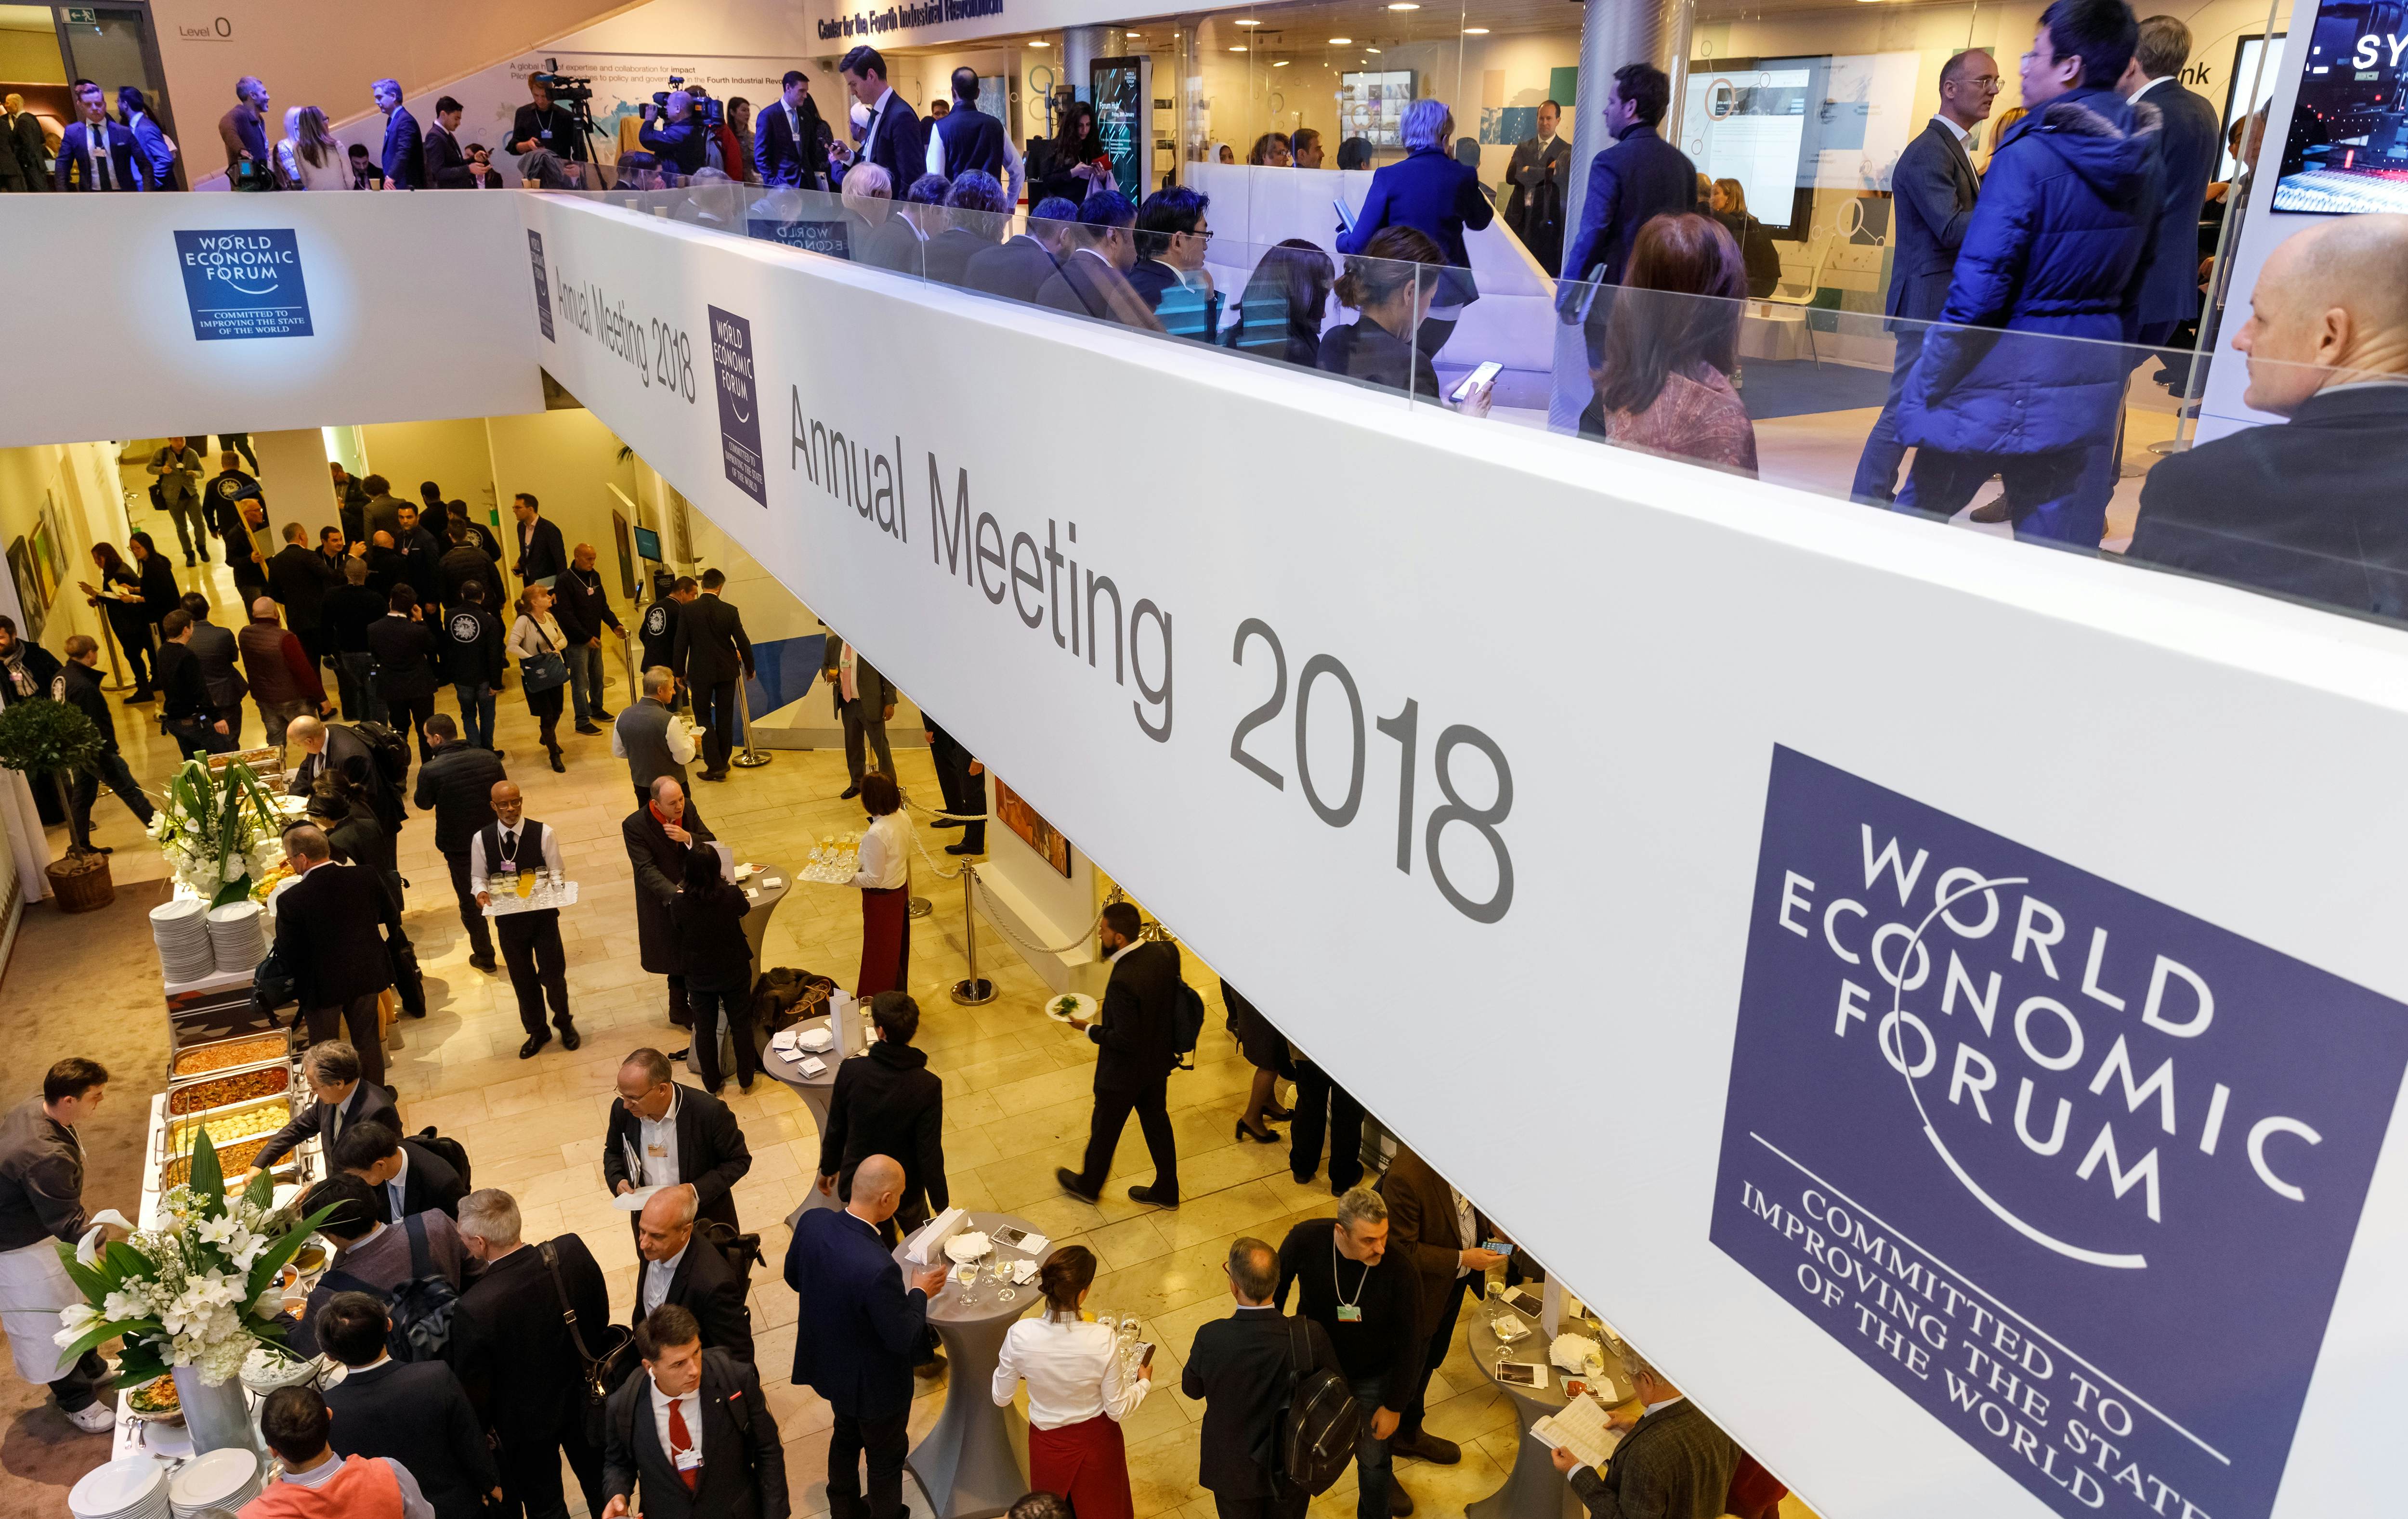 The annual meeting of the World Economic Forum